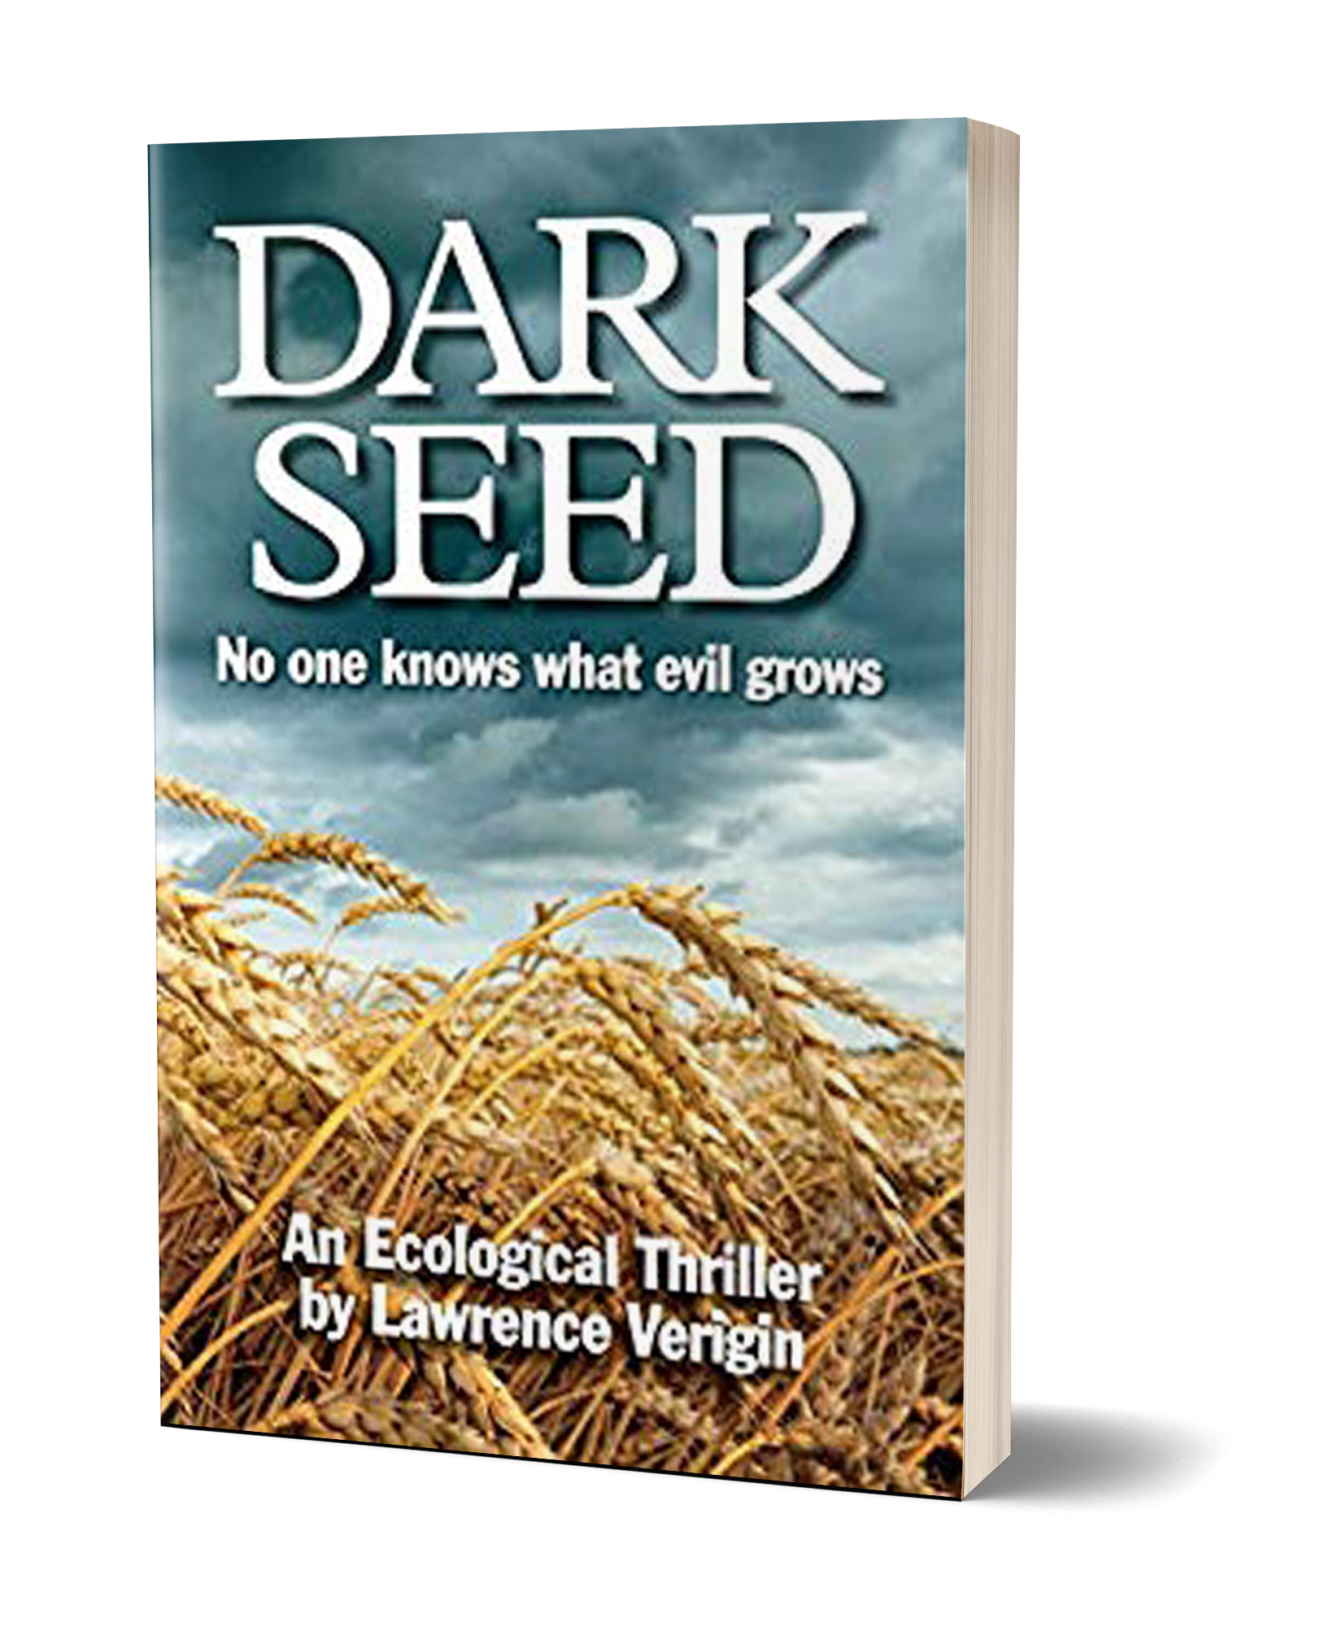 Seed of Control by Lawrence Verigin